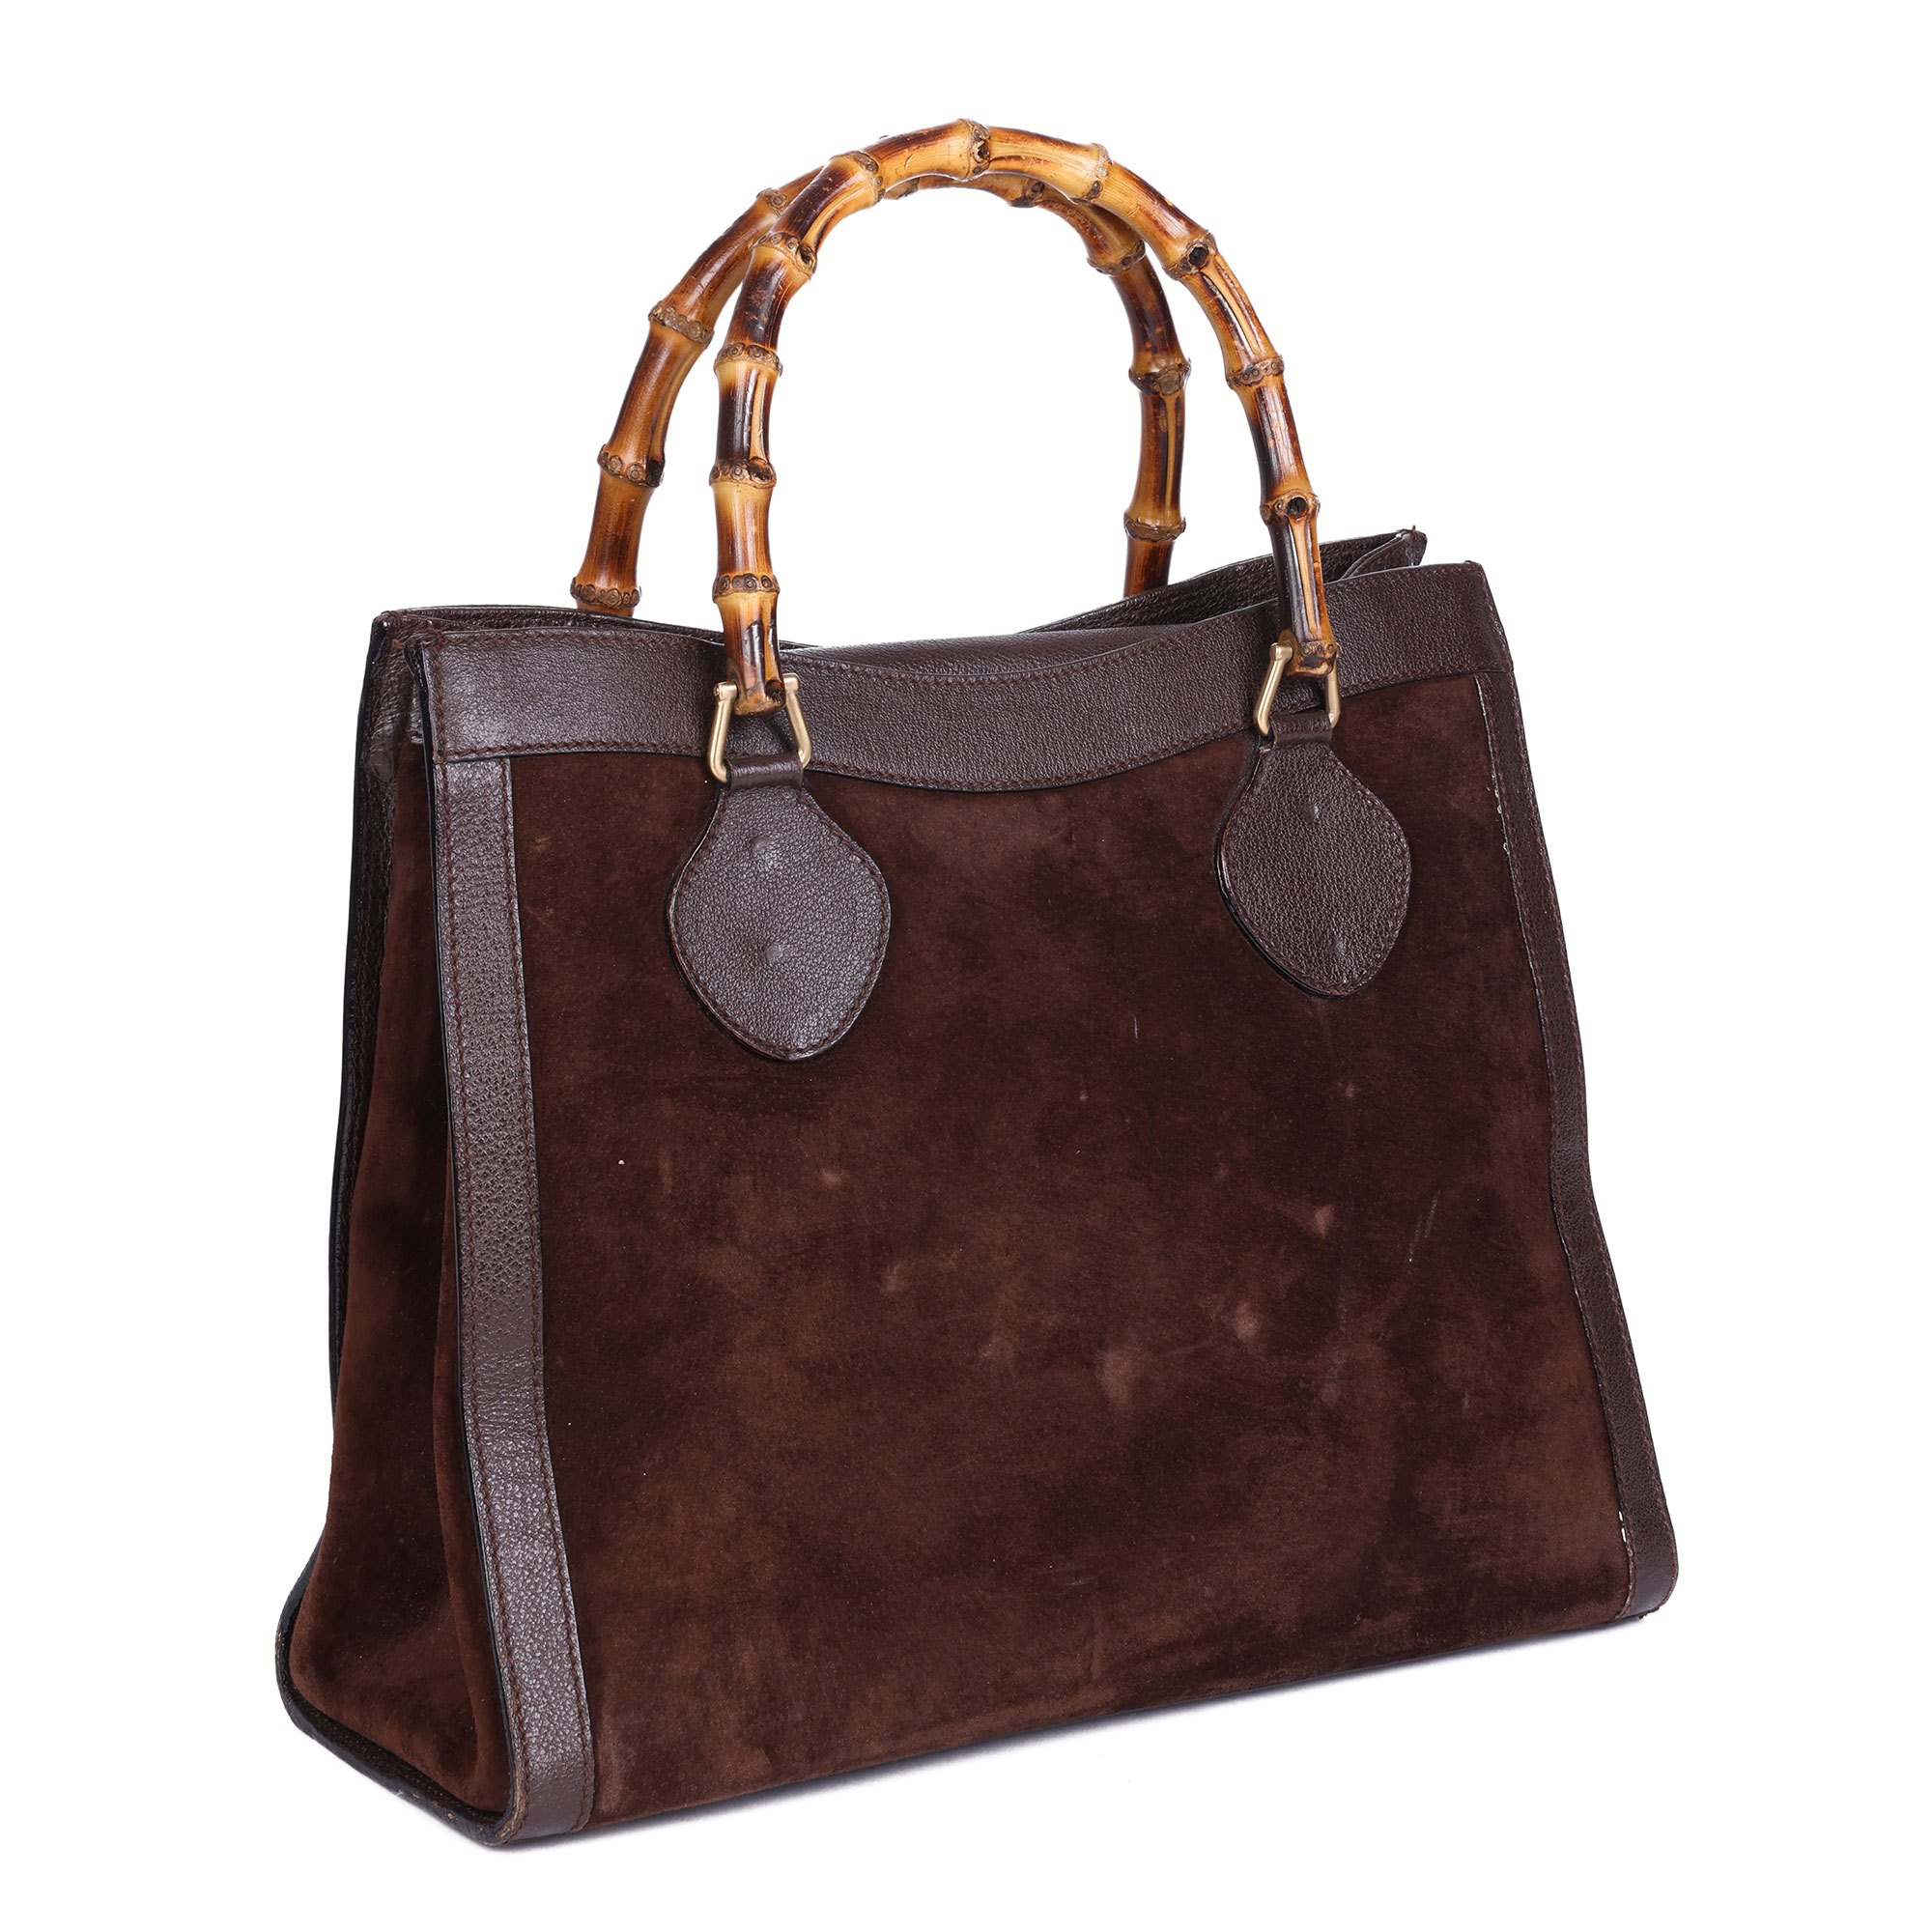 Gucci Brown Pigskin Leather & Suede Vintage Bamboo Tote